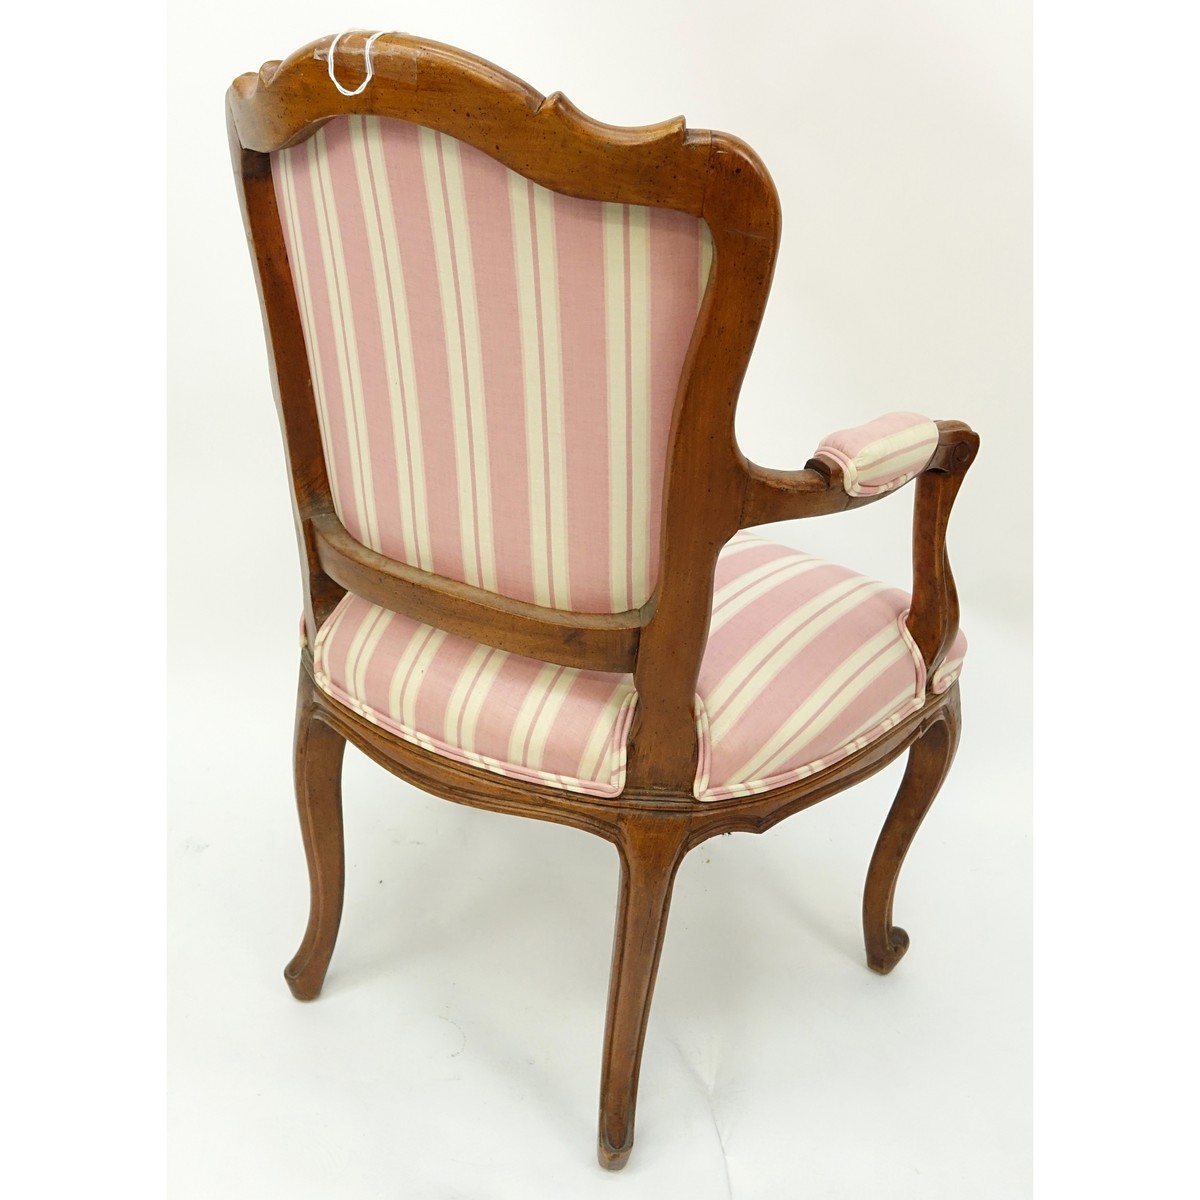 Vintage Italian Carved Wood and Upholstered Armchair Chair. Light scuffs and scratches to wood frame, backrest has some spotting to upholstery.